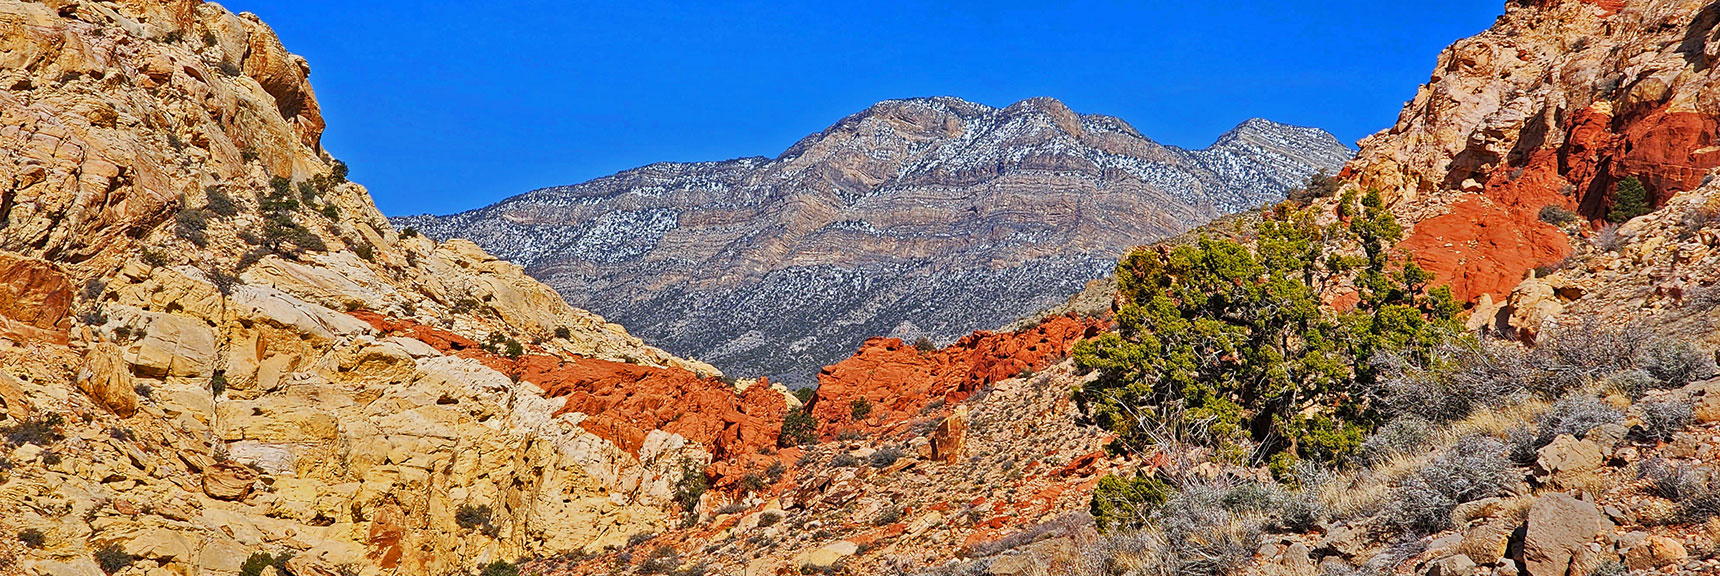 El Bastardo Mt. Appears on the Distant Keystone Thrust Cliffs. | Ash Canyon to Calico Tanks | Calico Basin and Red Rock Canyon, Nevada | David Smith | Las Vegas Area Trails